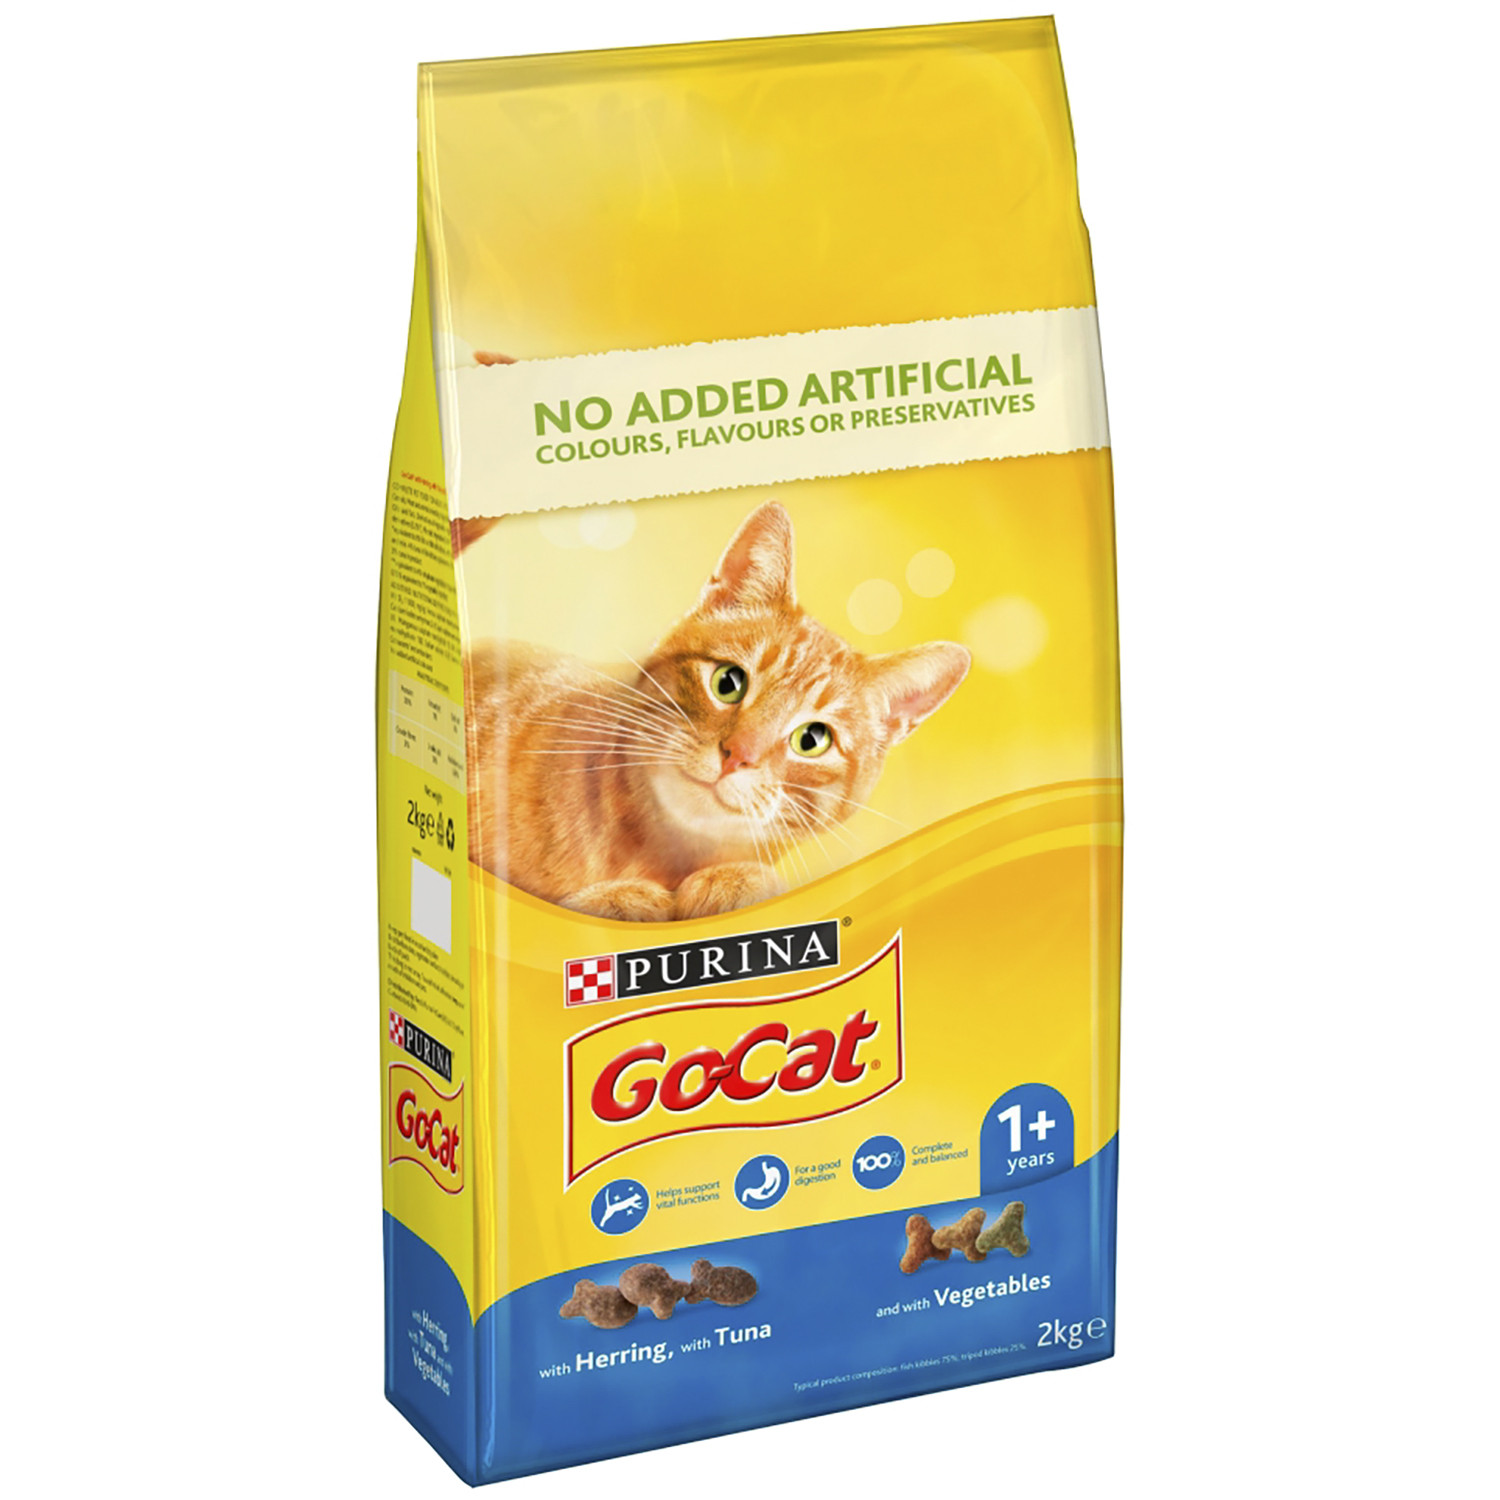 Purina Go Cat Adult Dry Cat Food with Tuna Herring and Vegetables Image